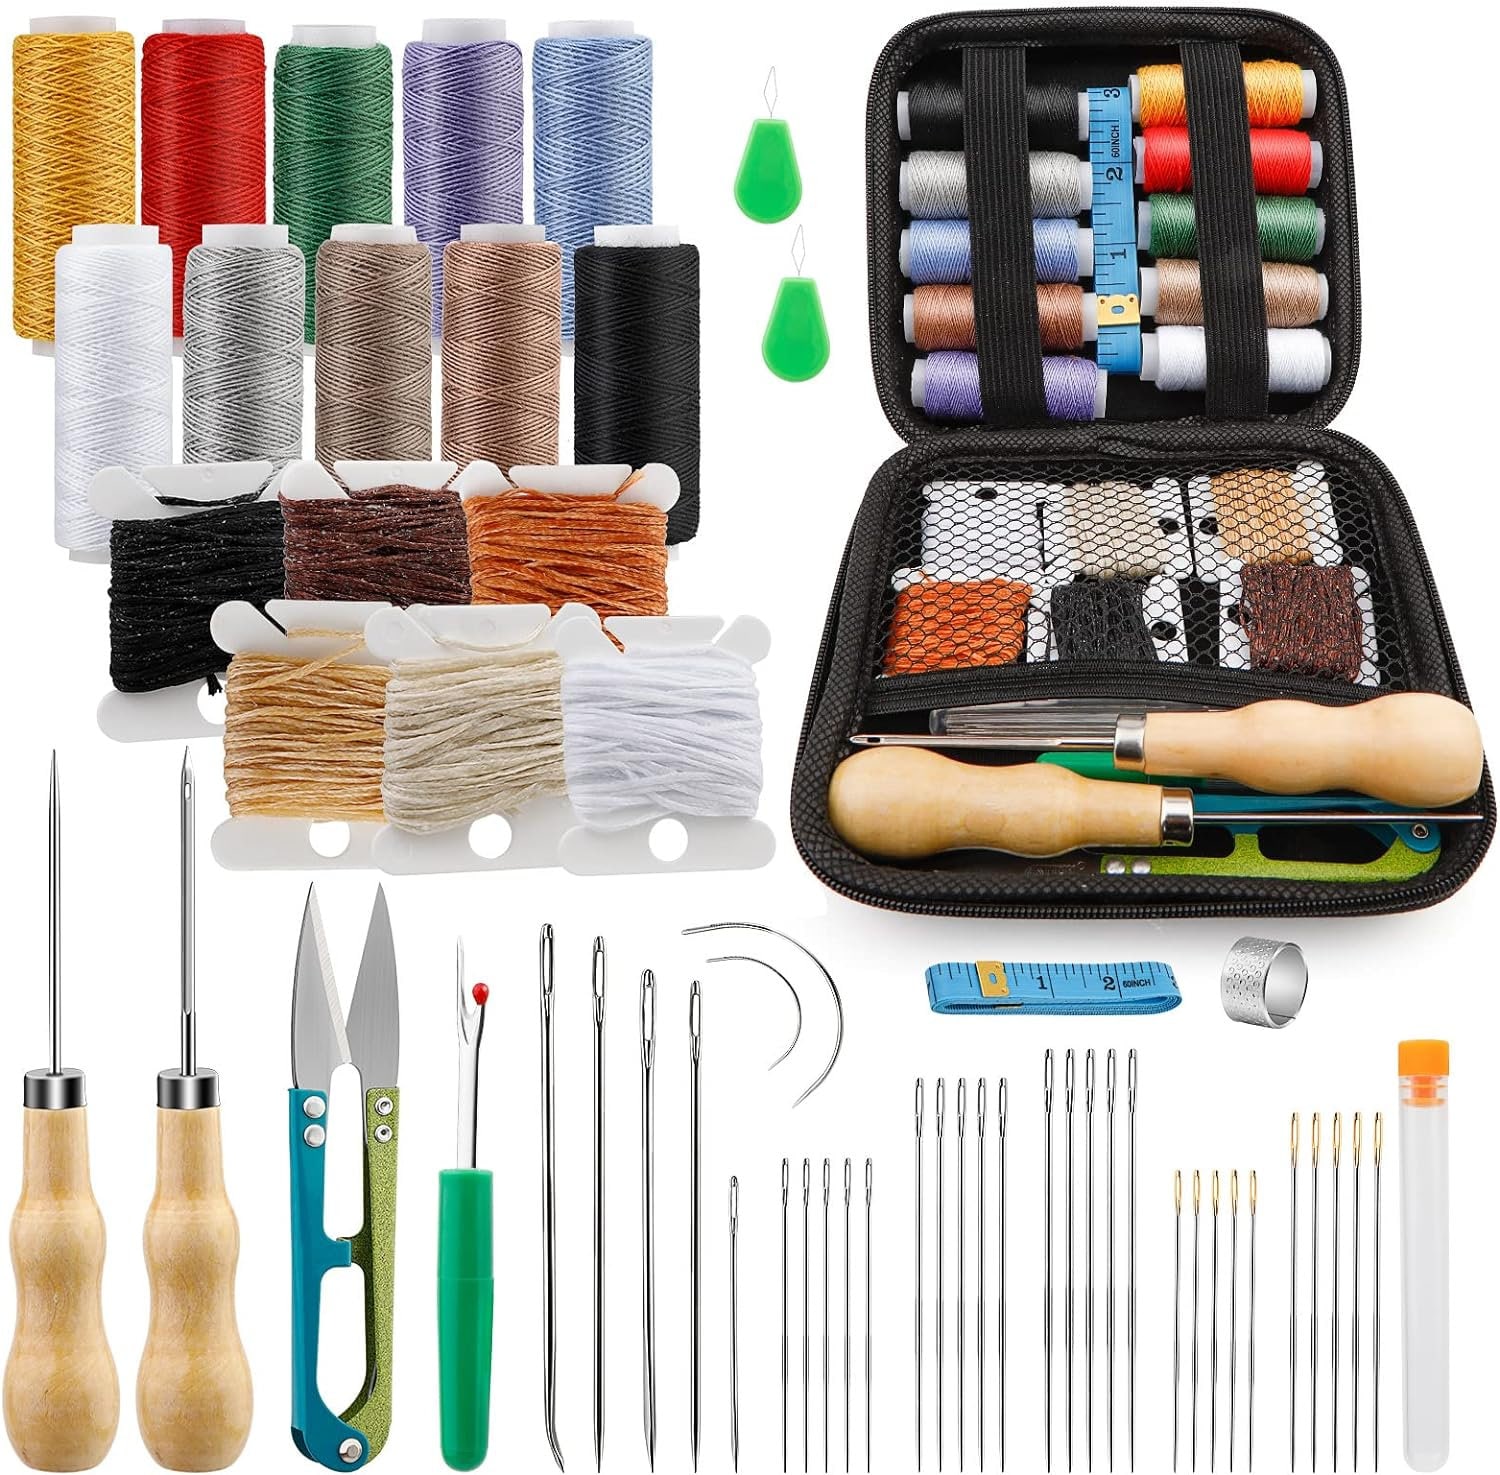 Leather Sewing Kit, Leather Sewing Upholstery Repair Kit, Leather Needle  and Thread Kit, Leather Working Tools with Large-Eye Needles, Waxed Thread,  Sewing Awl, for Repairing and DIY Leather Craft